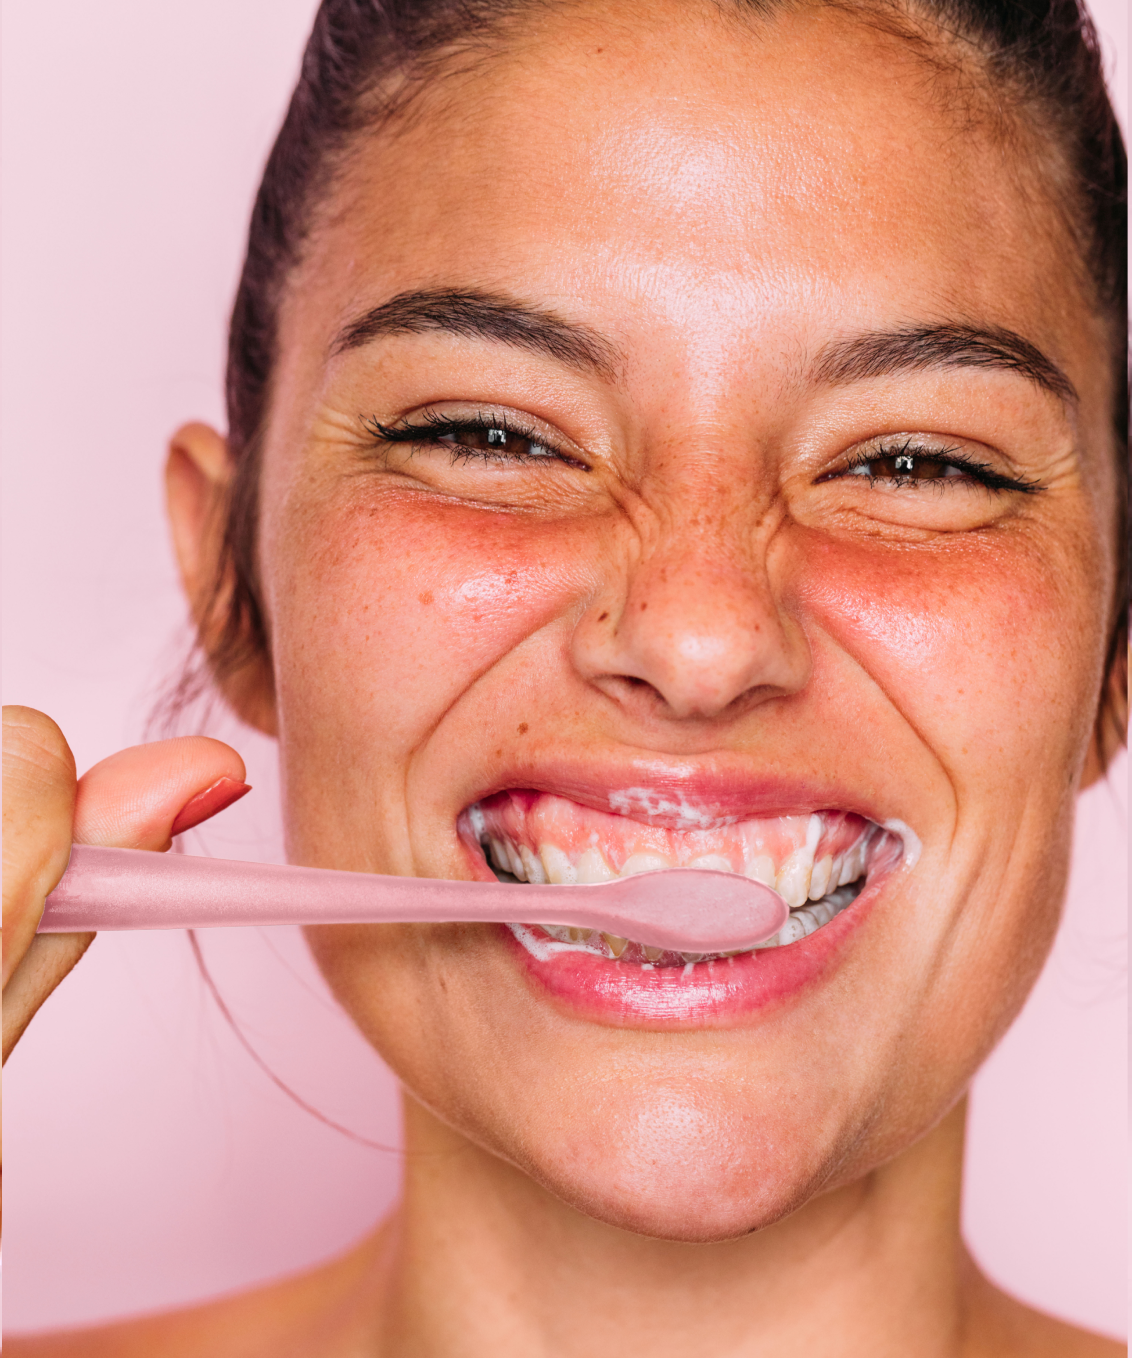 A widely smiling model brushing her teeth with a pink Euthymol Whitenin Toothbrush, looking right at the viewer